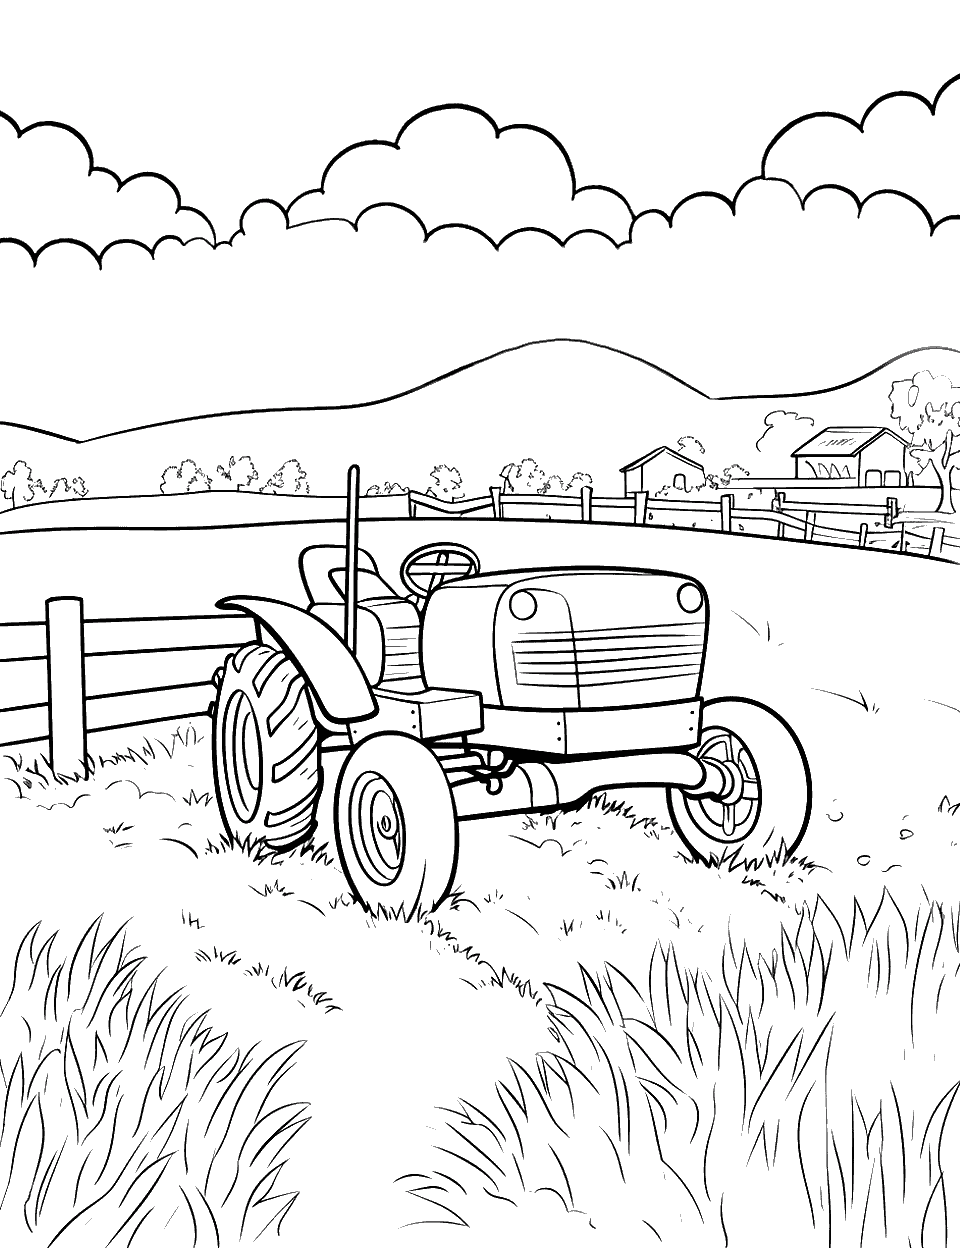 Tractor in the Field Farm Coloring Page - A tractor in a field ready to plow it.